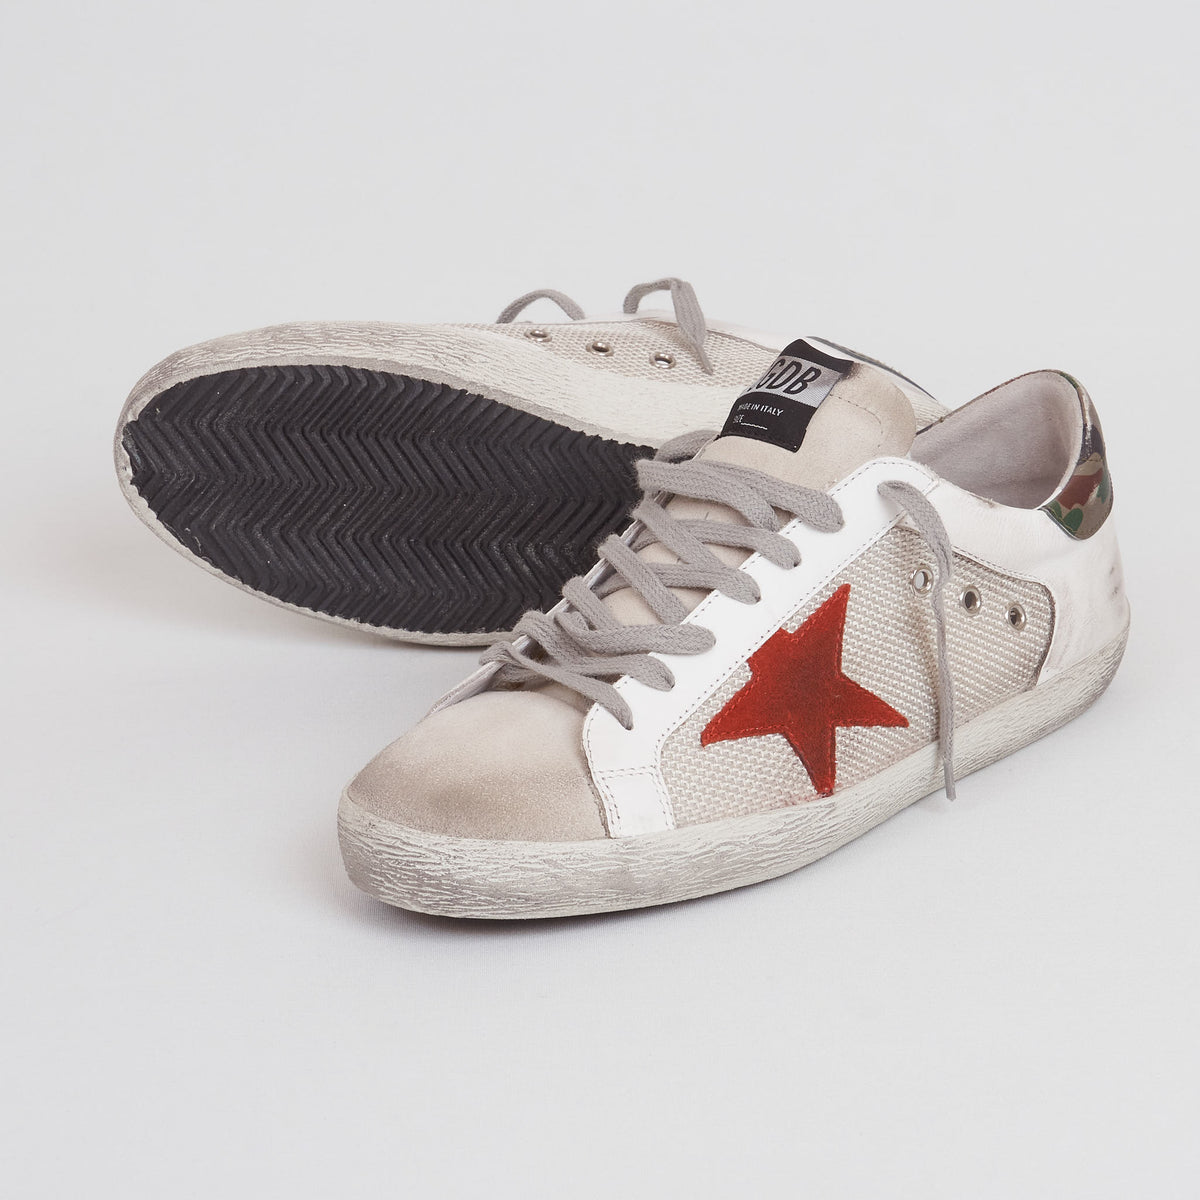 Golden Goose Superstar White Red Camouflage Sneakers